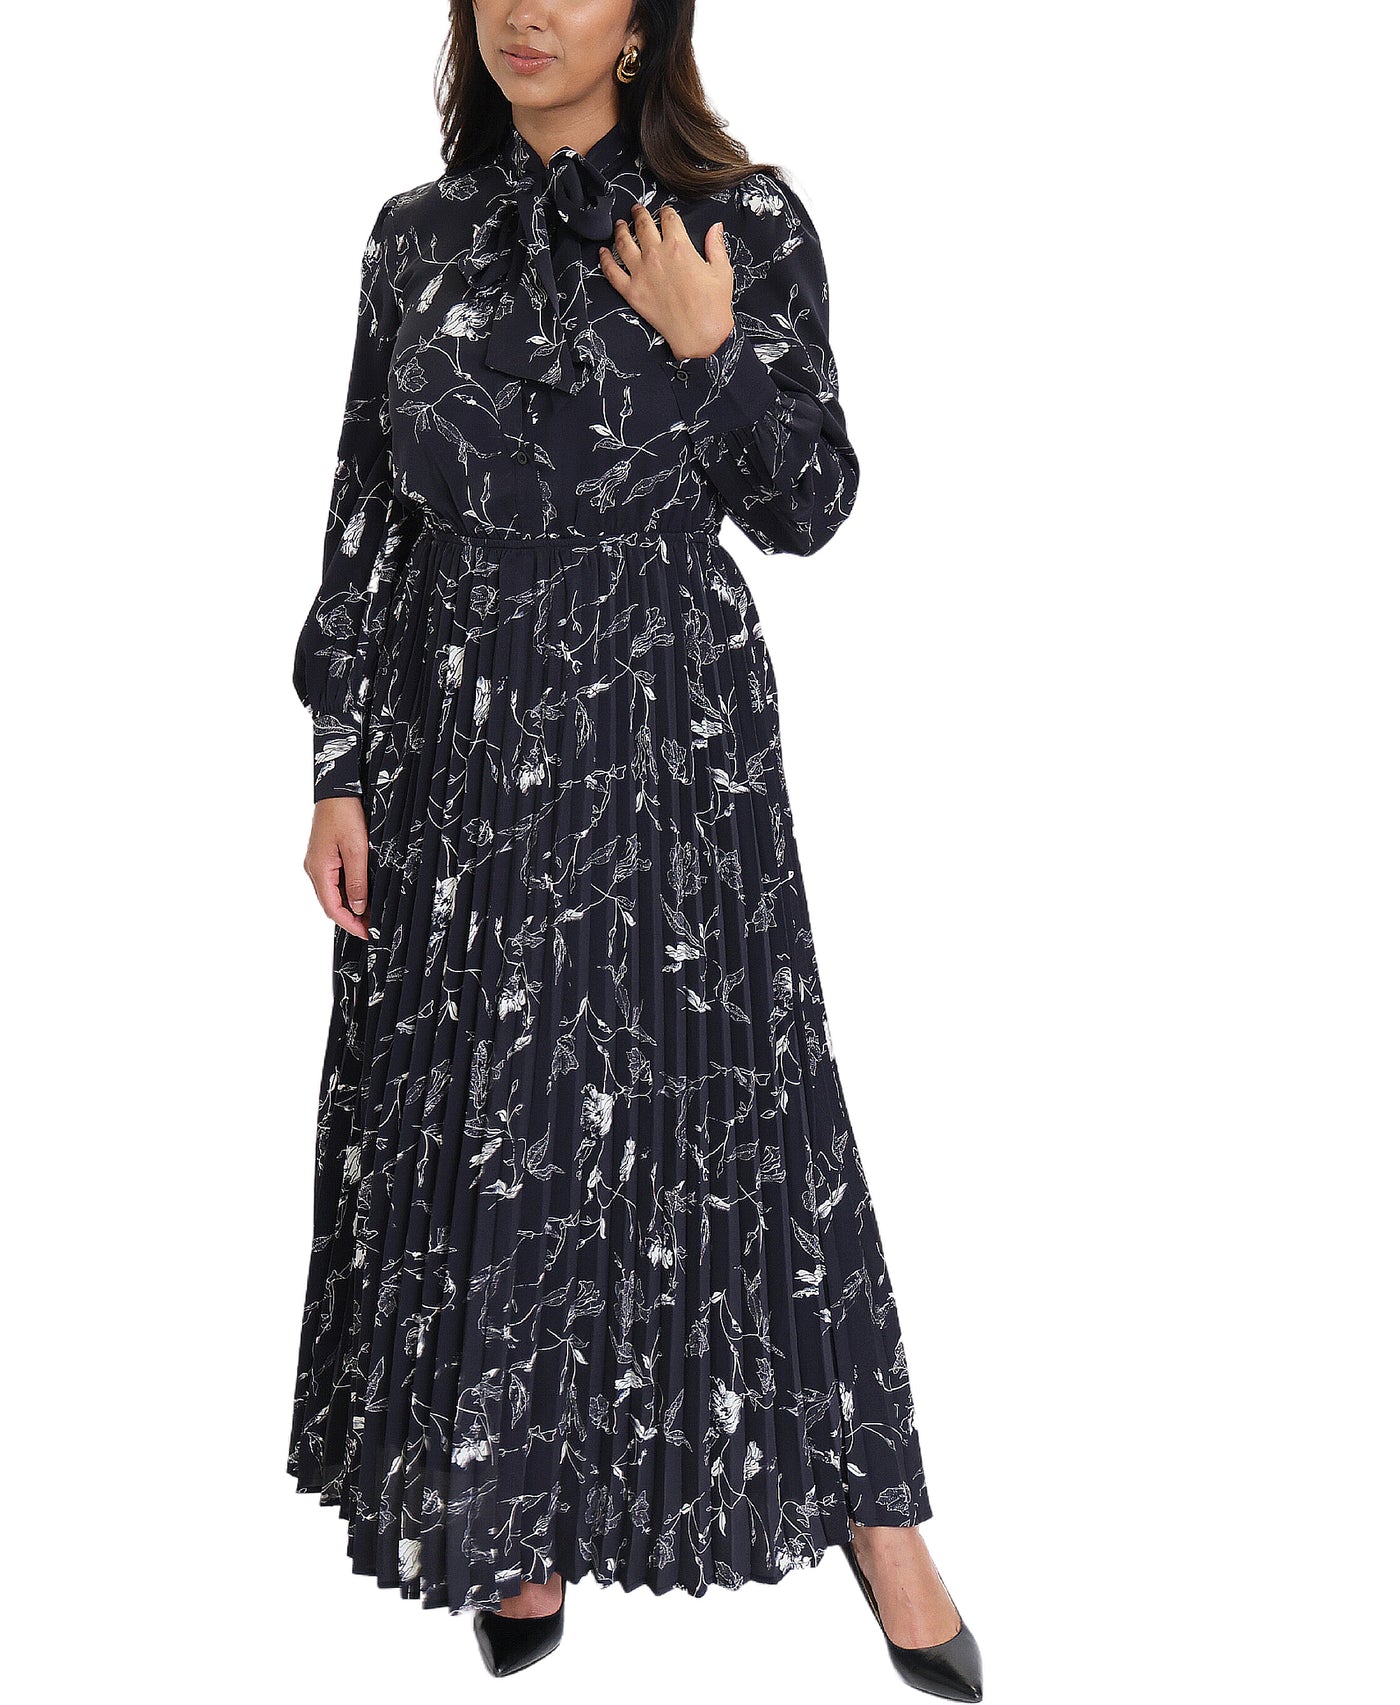 Floral Print Pleated Maxi Dress image 1